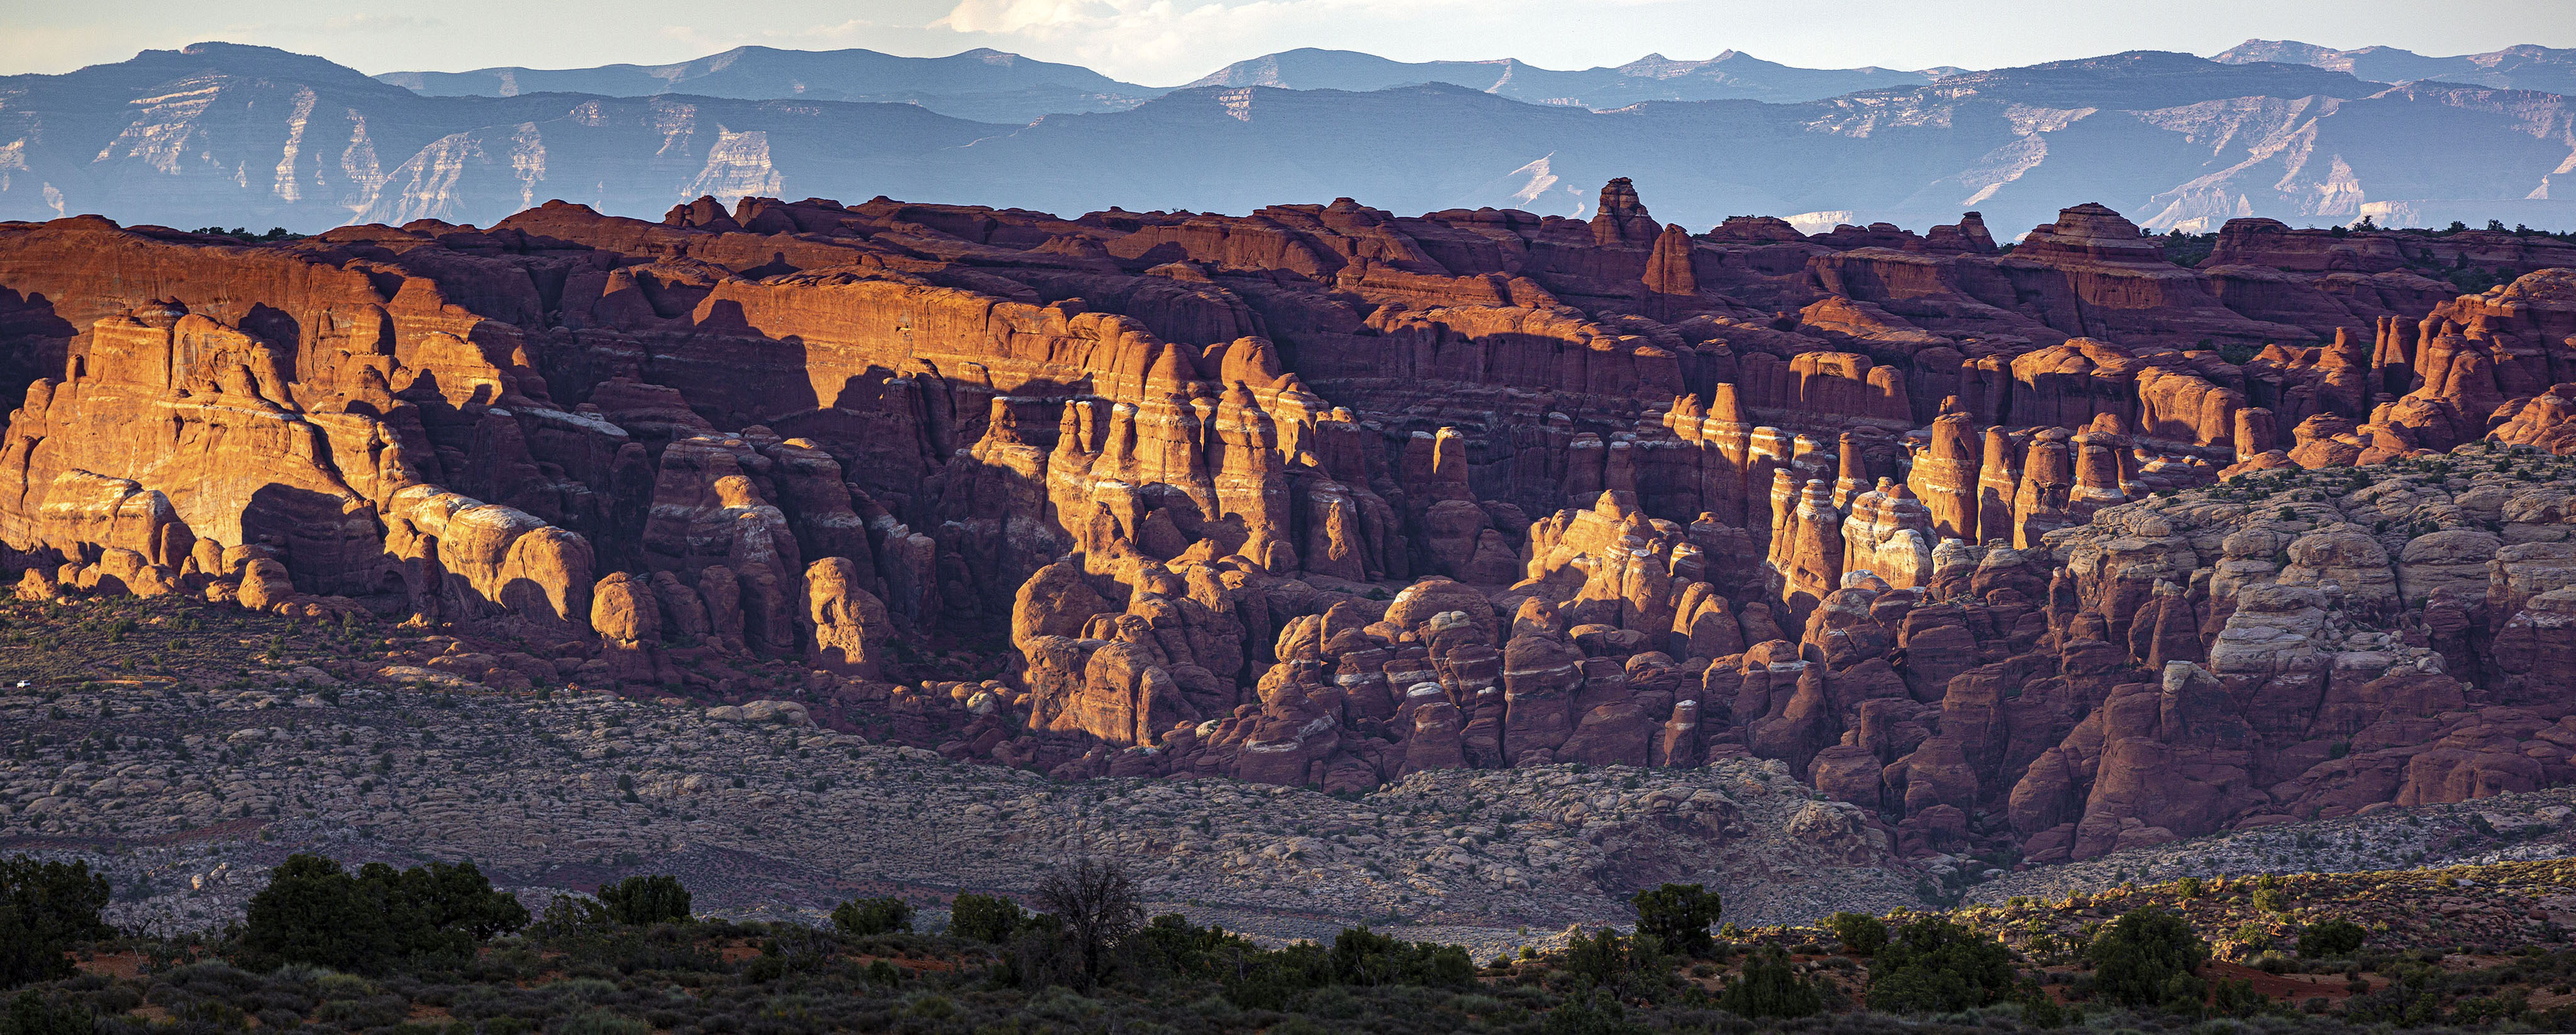 arches national park fiery furnace panorama